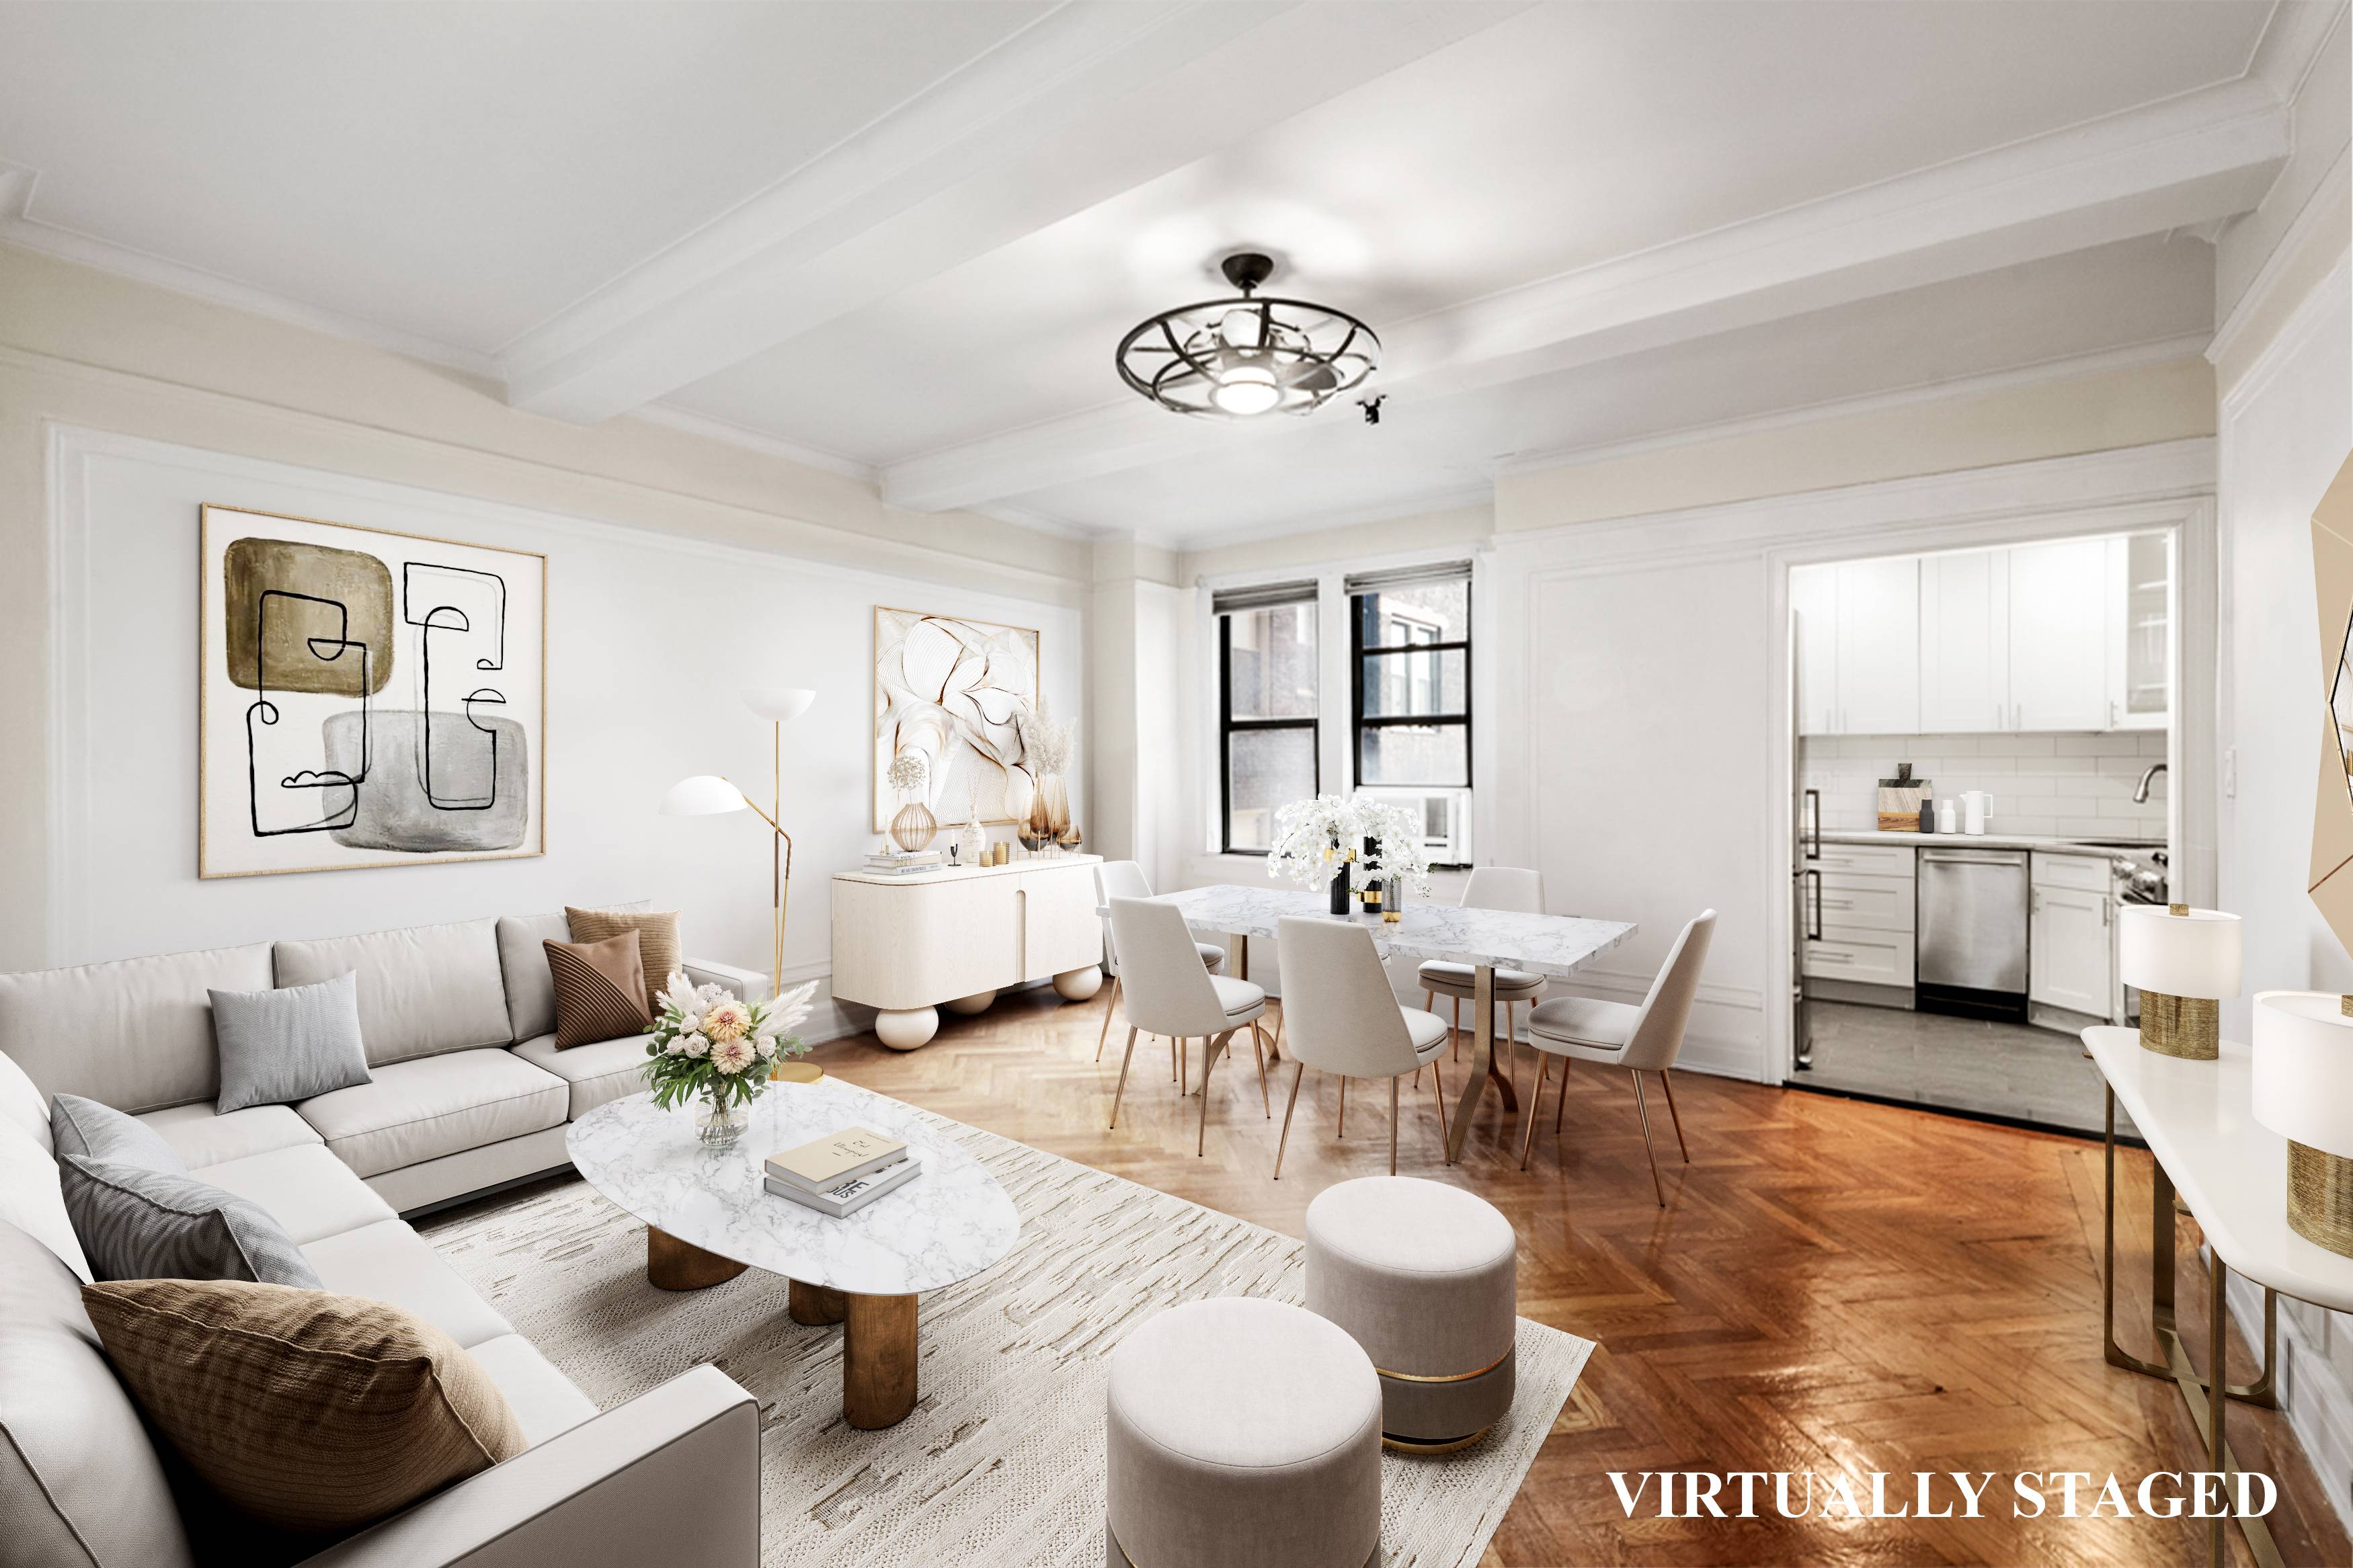 Pre war detail abound at this gorgeous one bedroom home in the heart of the Upper Westside.